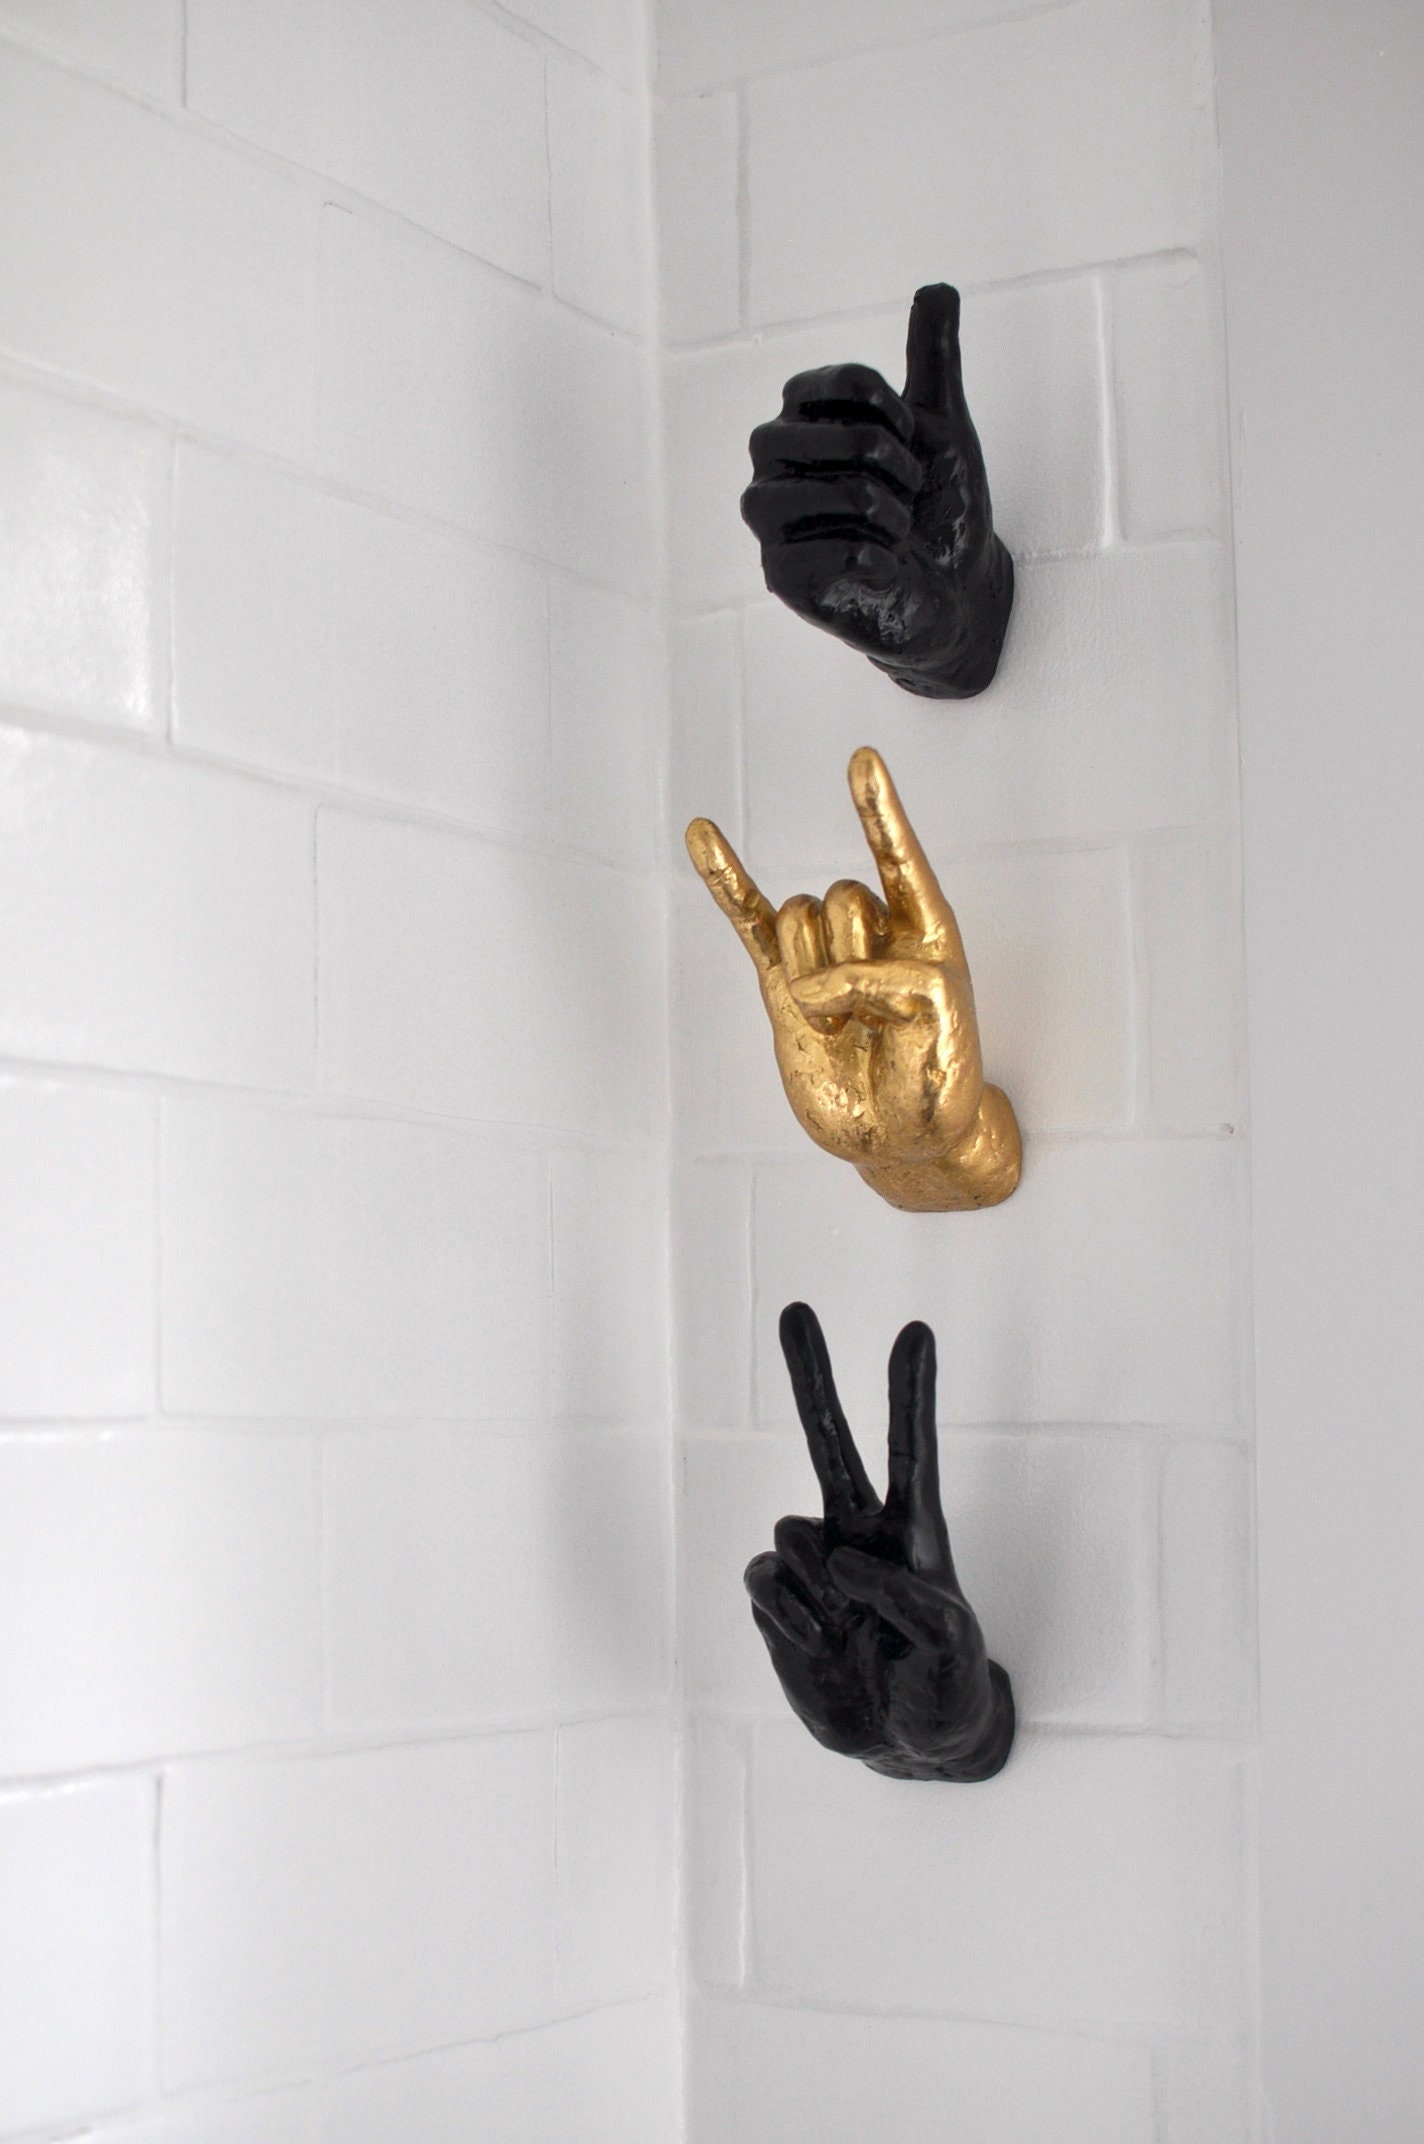 Rock On and Peace Wall Hands | Wall Art | Eclectic Decor | Gallery Wall Art  | Rock On Hand | Peace Hand